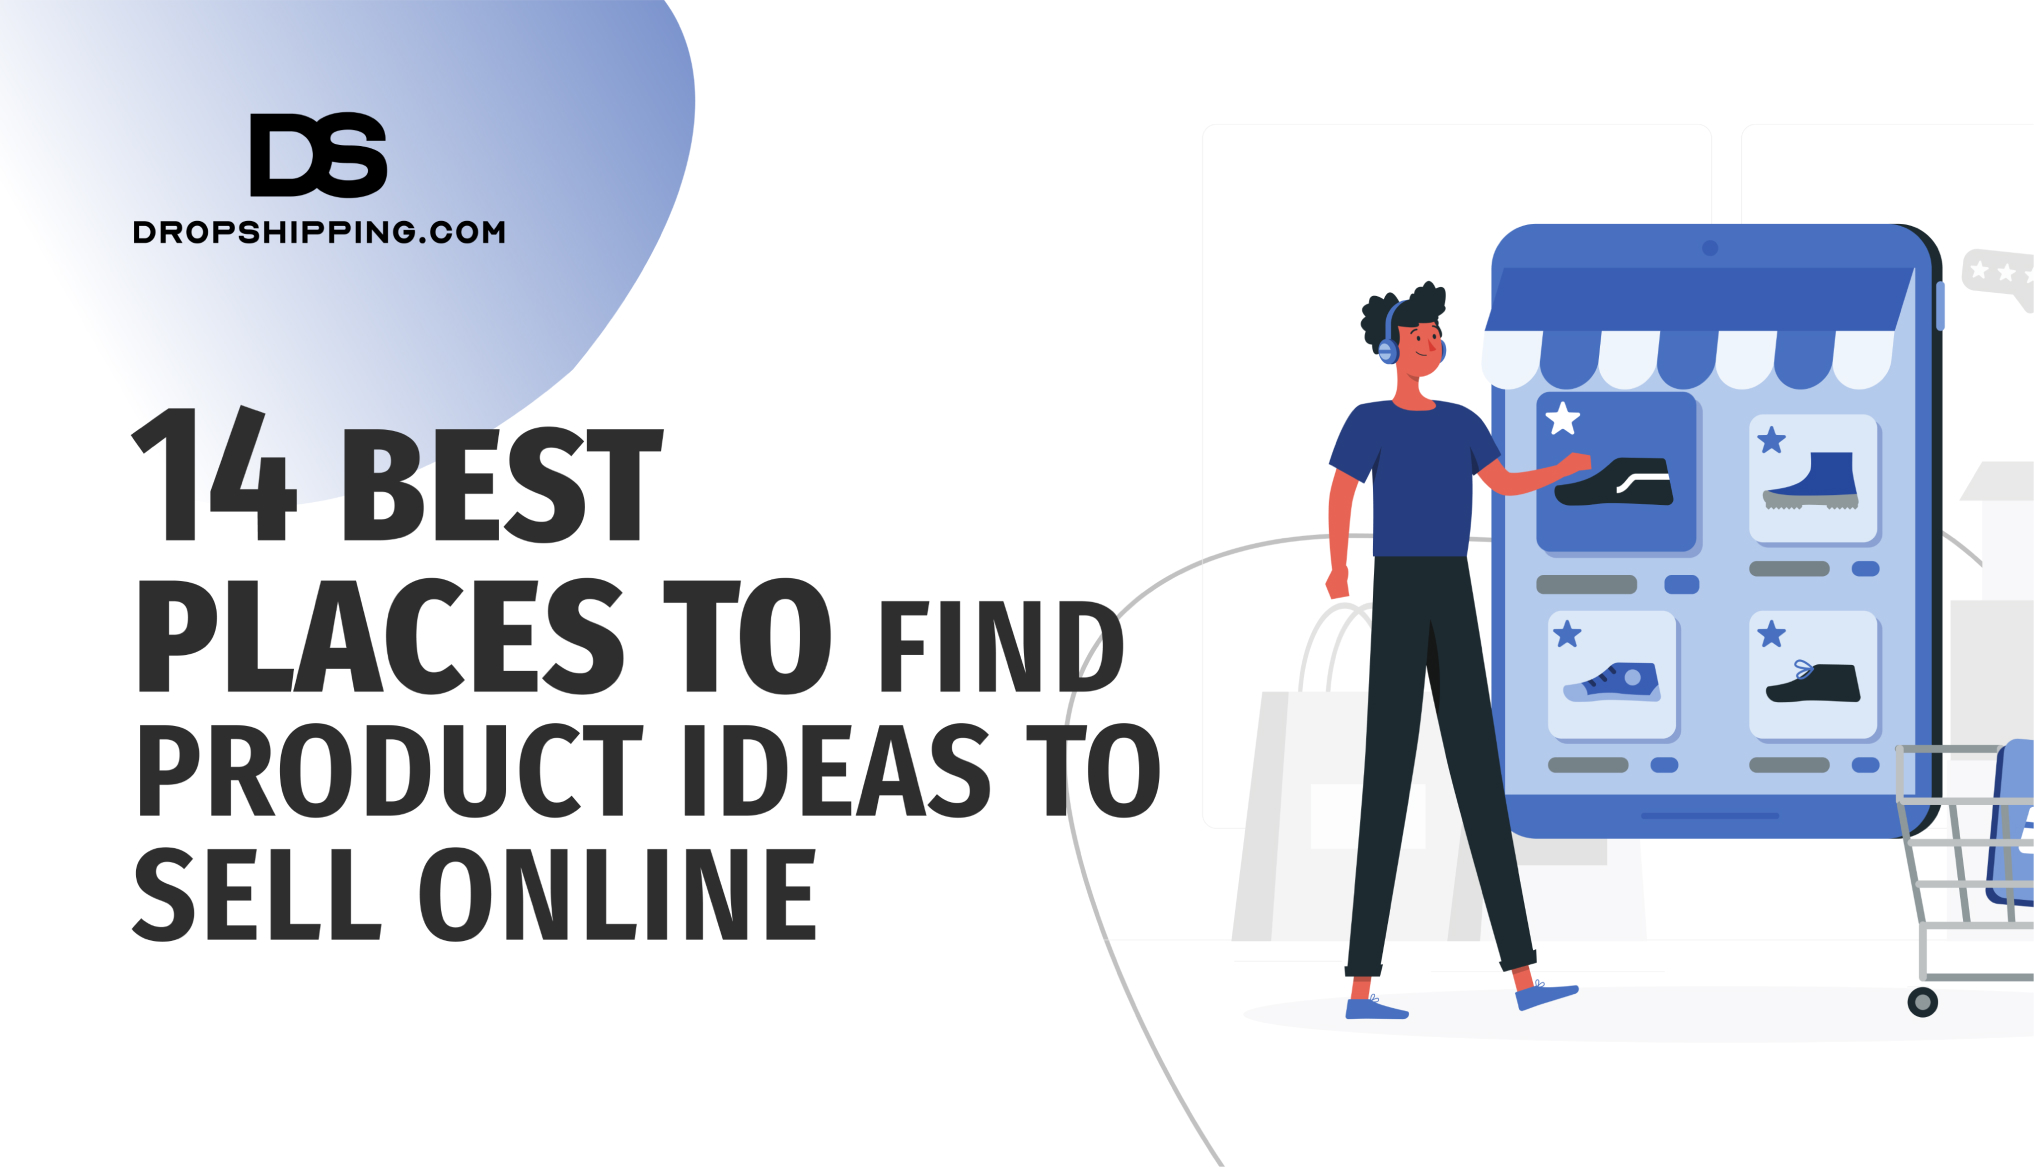 Seven ways to find product ideas to sell online